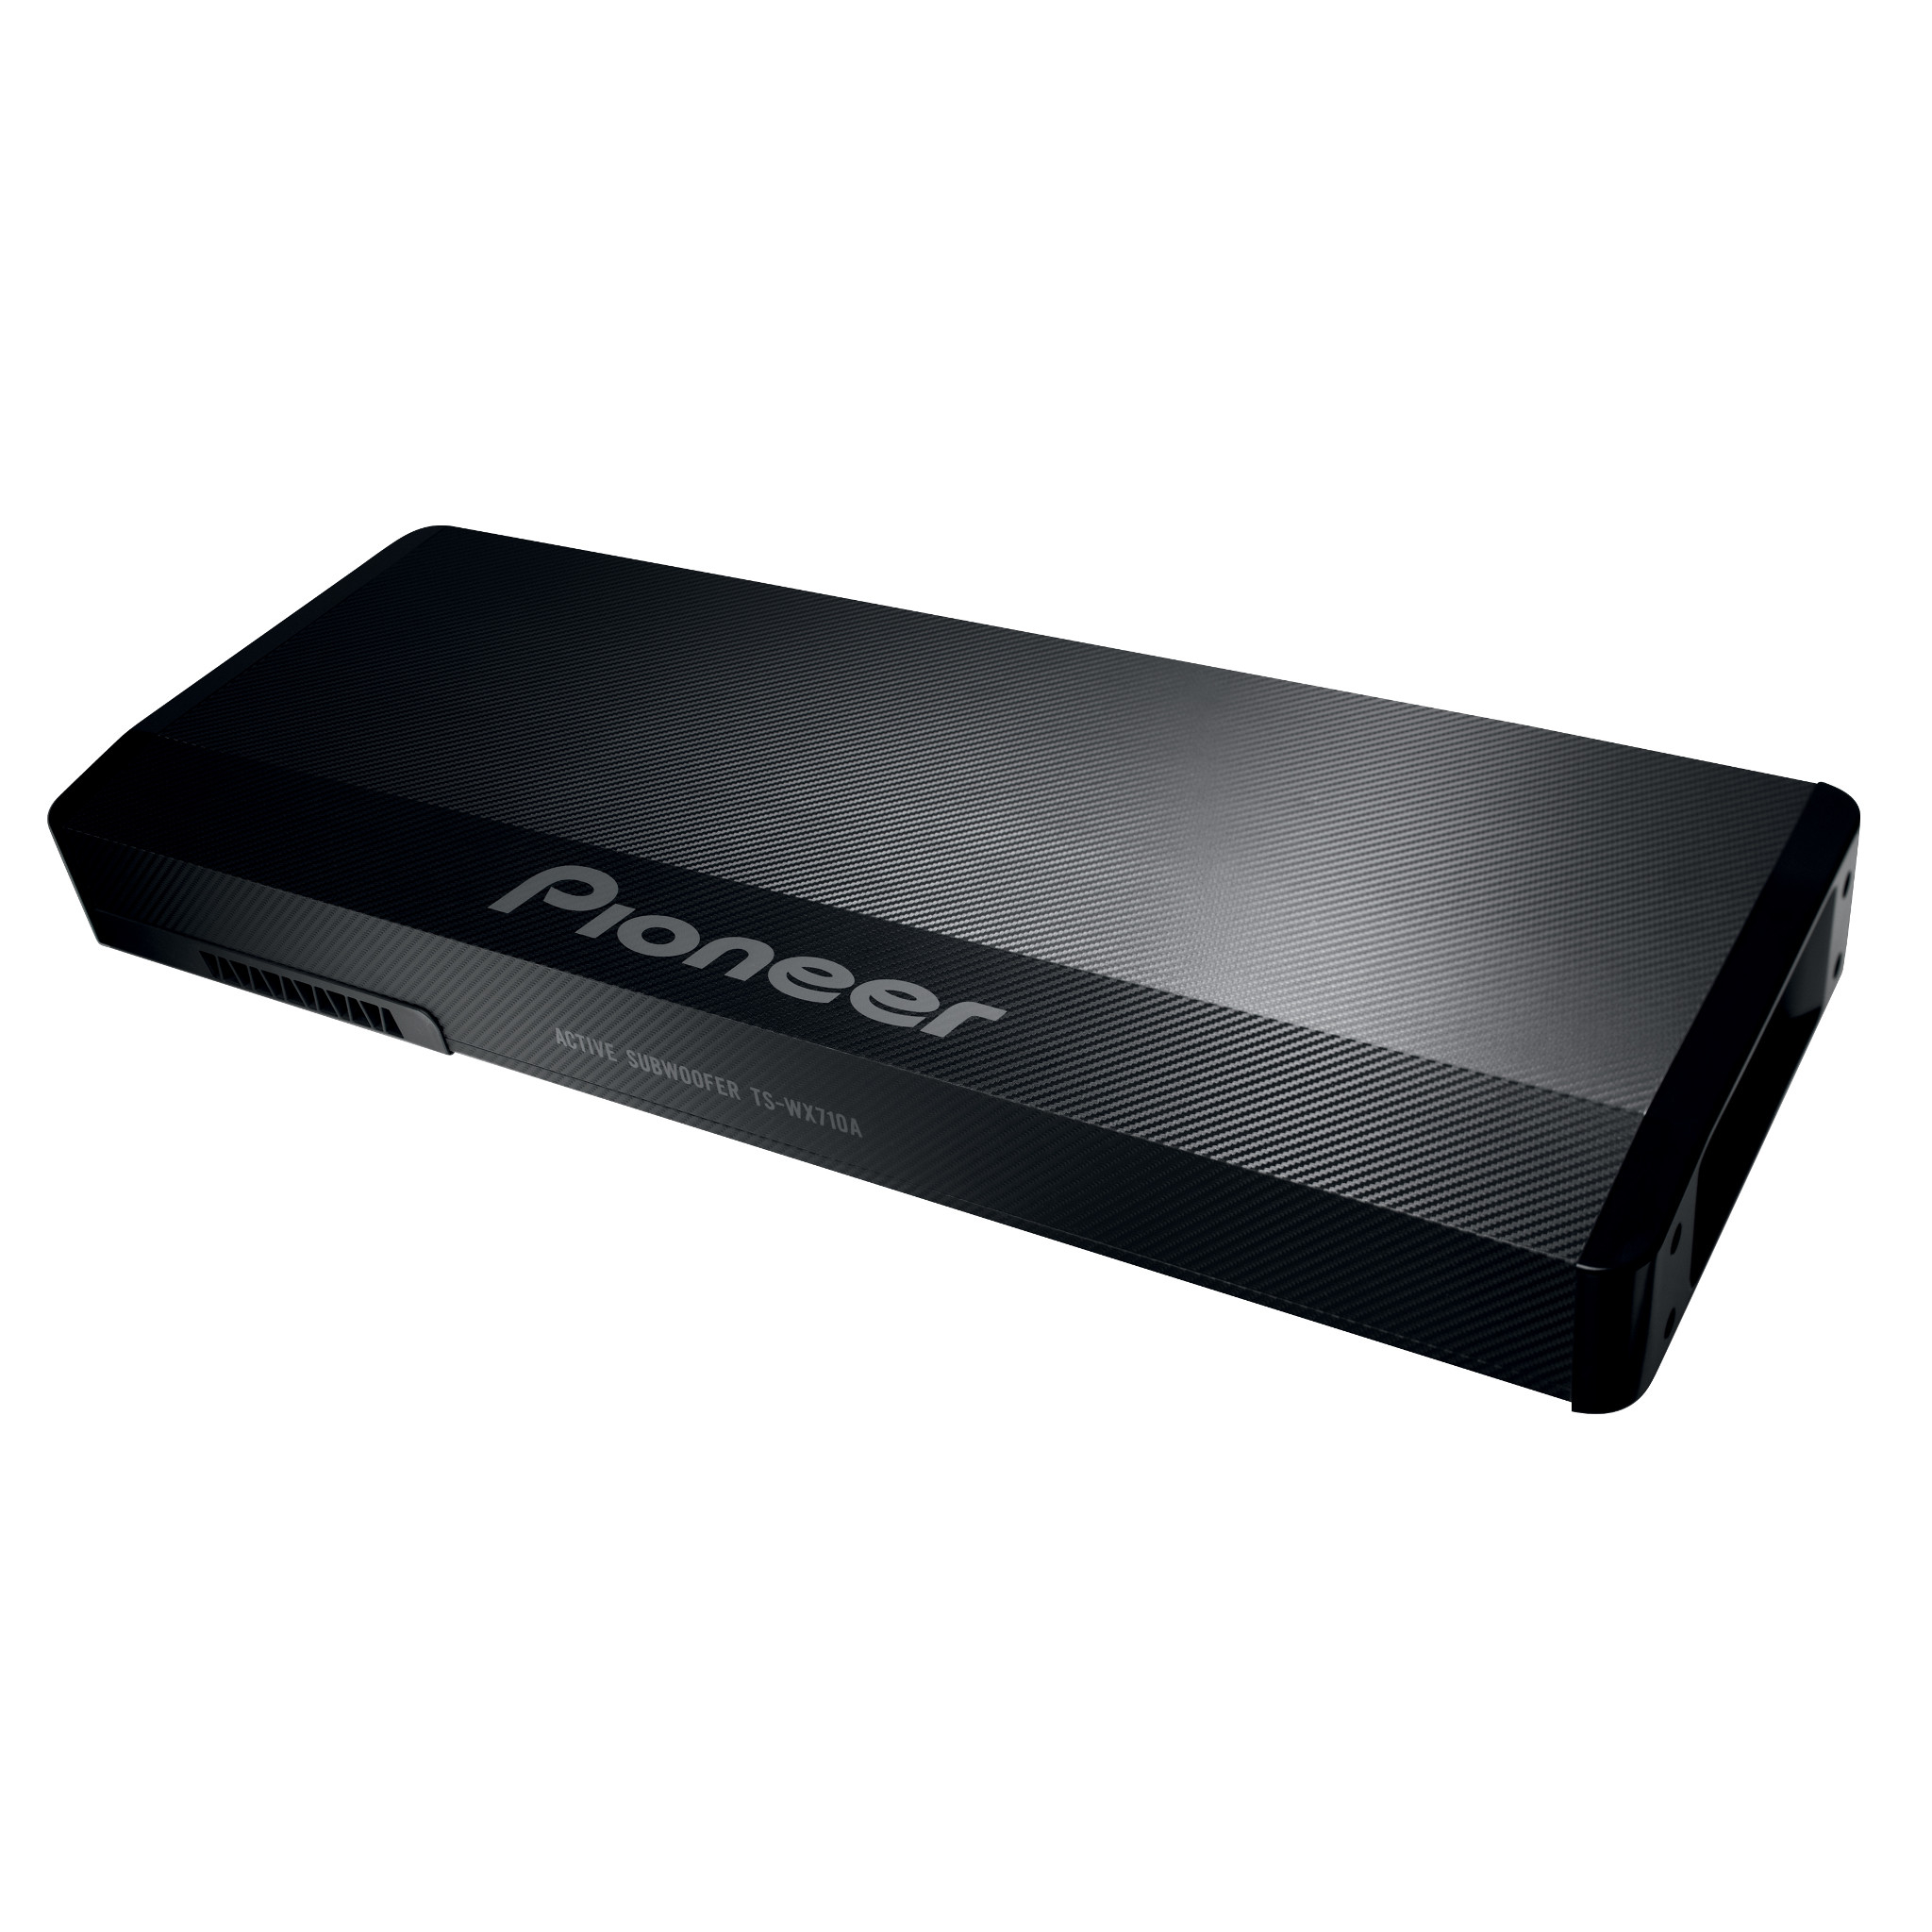 Pioneer TS-WX710A